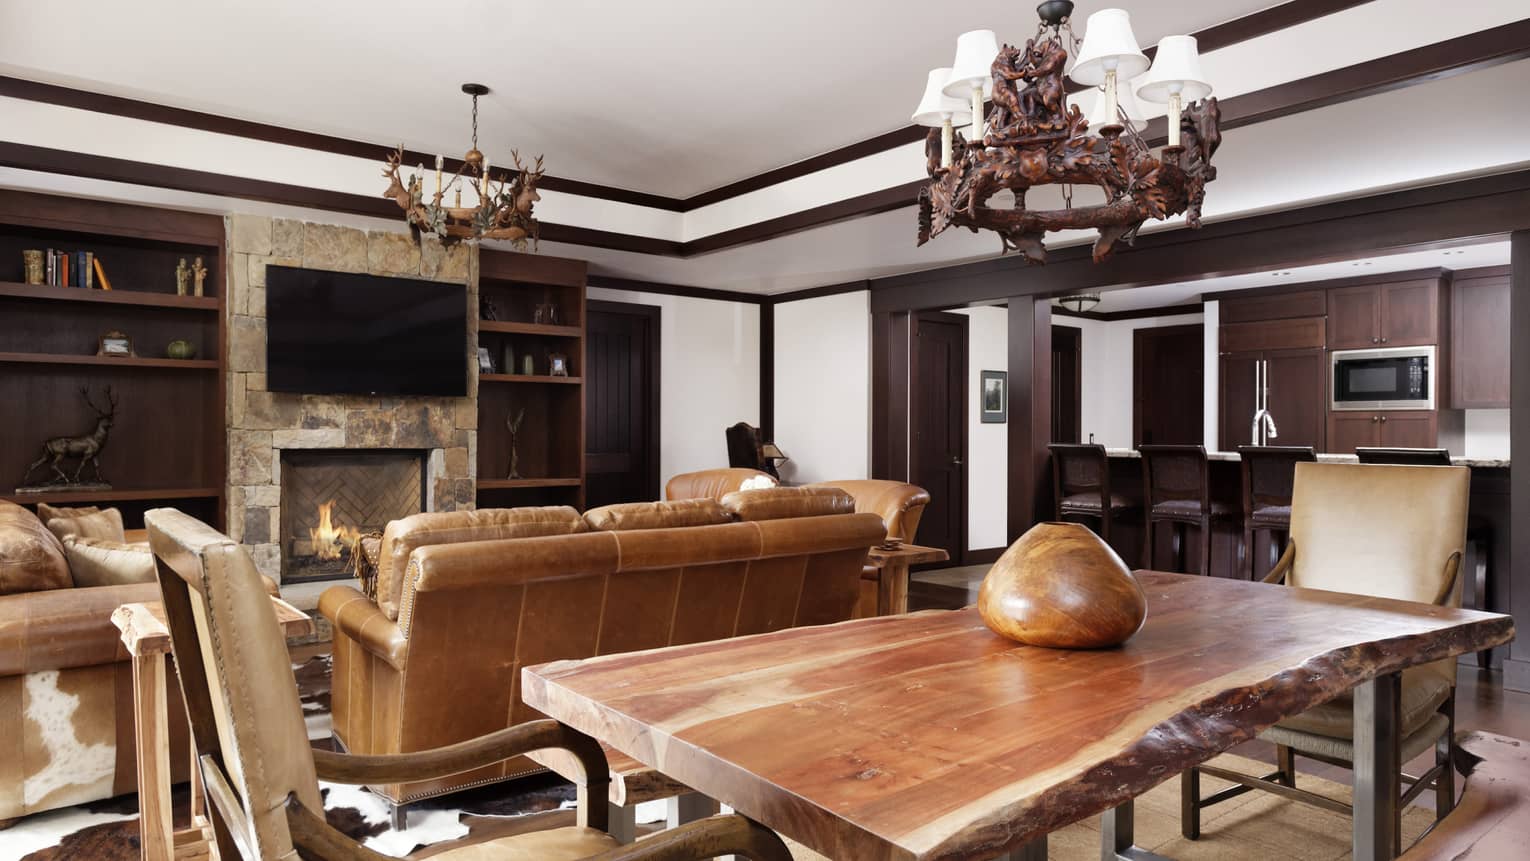 Large dining table made of rustic wood, next to living room with brown leather sofas